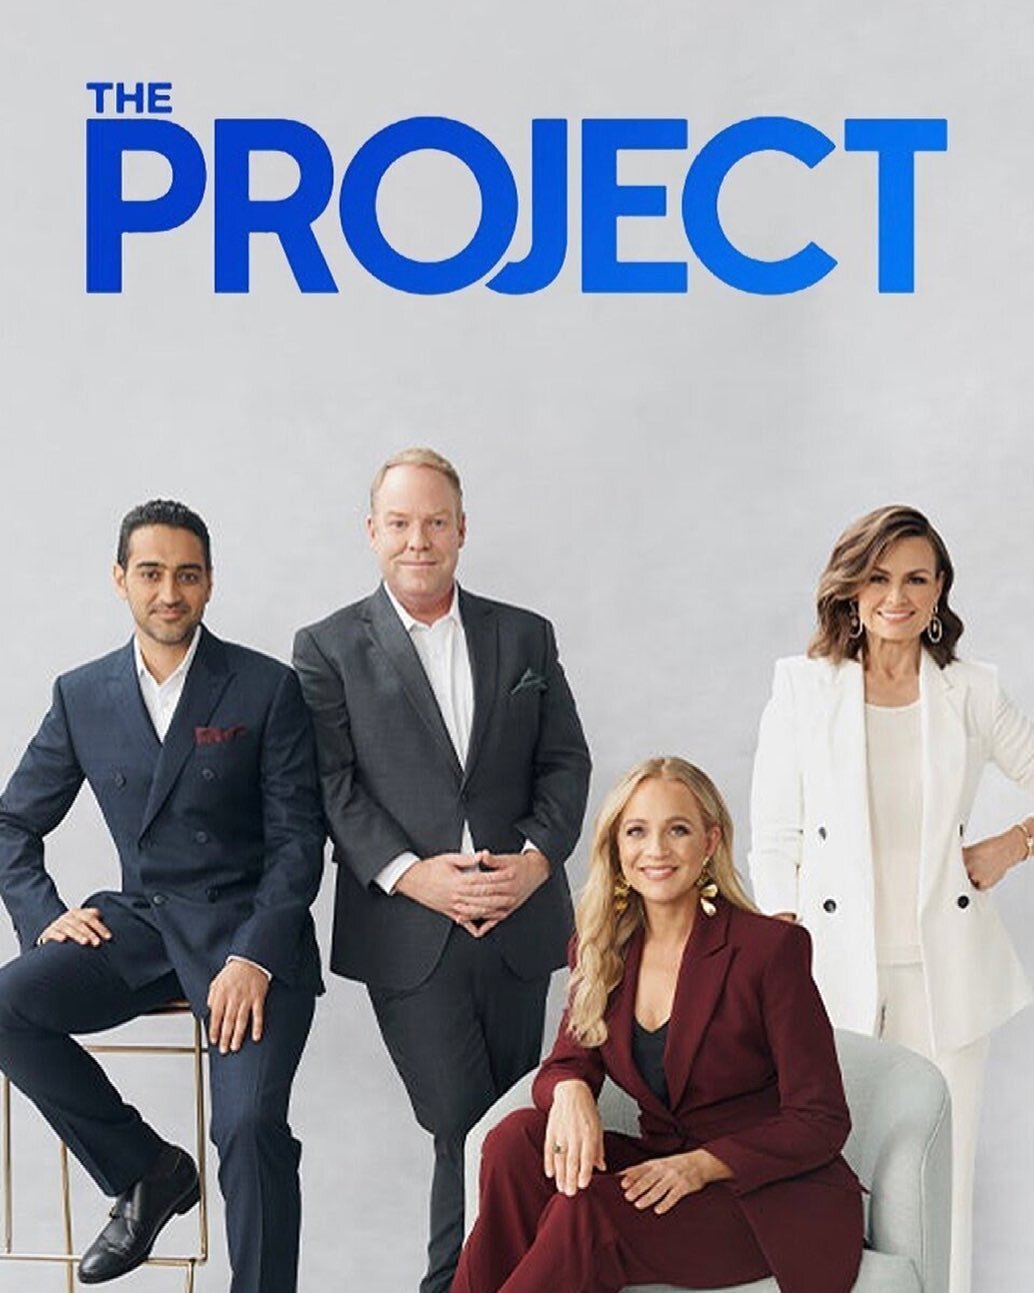 In a serious pinch-me moment...one of my clients is going to be on @theprojecttv tonight!! 🎥 💫 

It&rsquo;s for an amazing campaign to help shine a light on the incredible work that educators do in the early education and care sector, and the jobs 